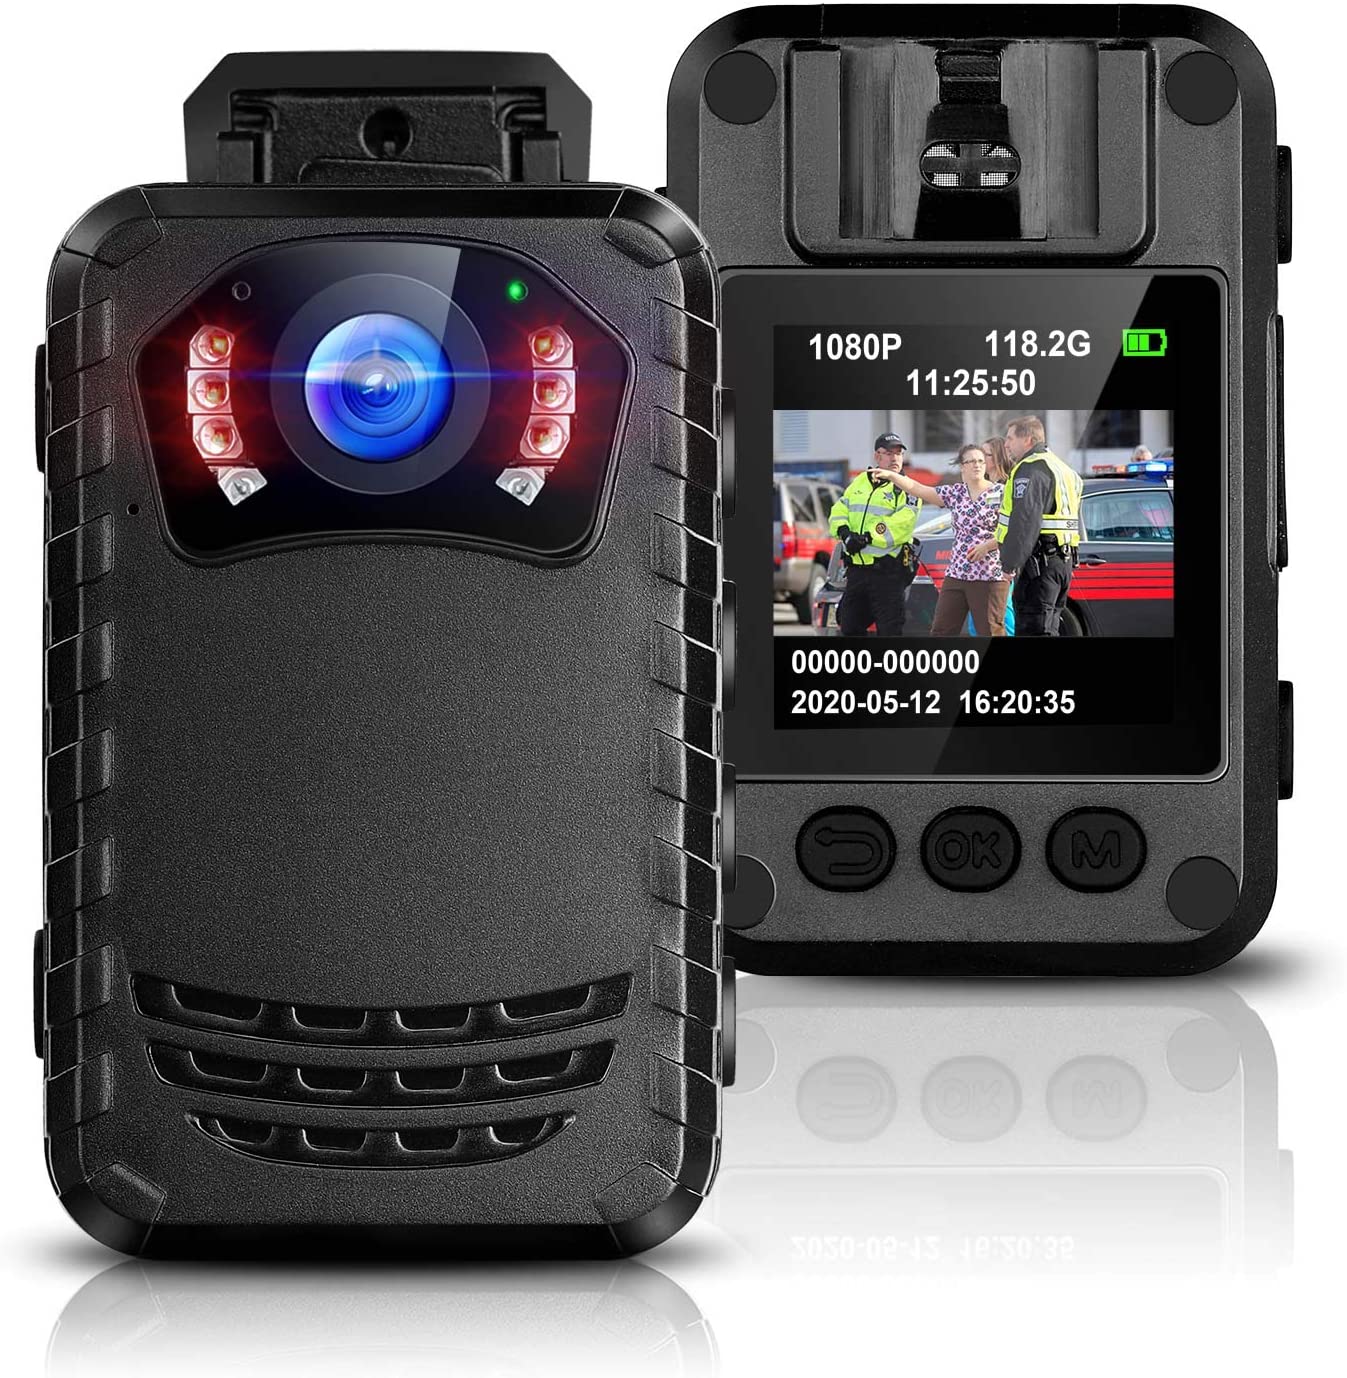 BOBLOV N9 Body Camera HD1296P with 8 hours recording capability0